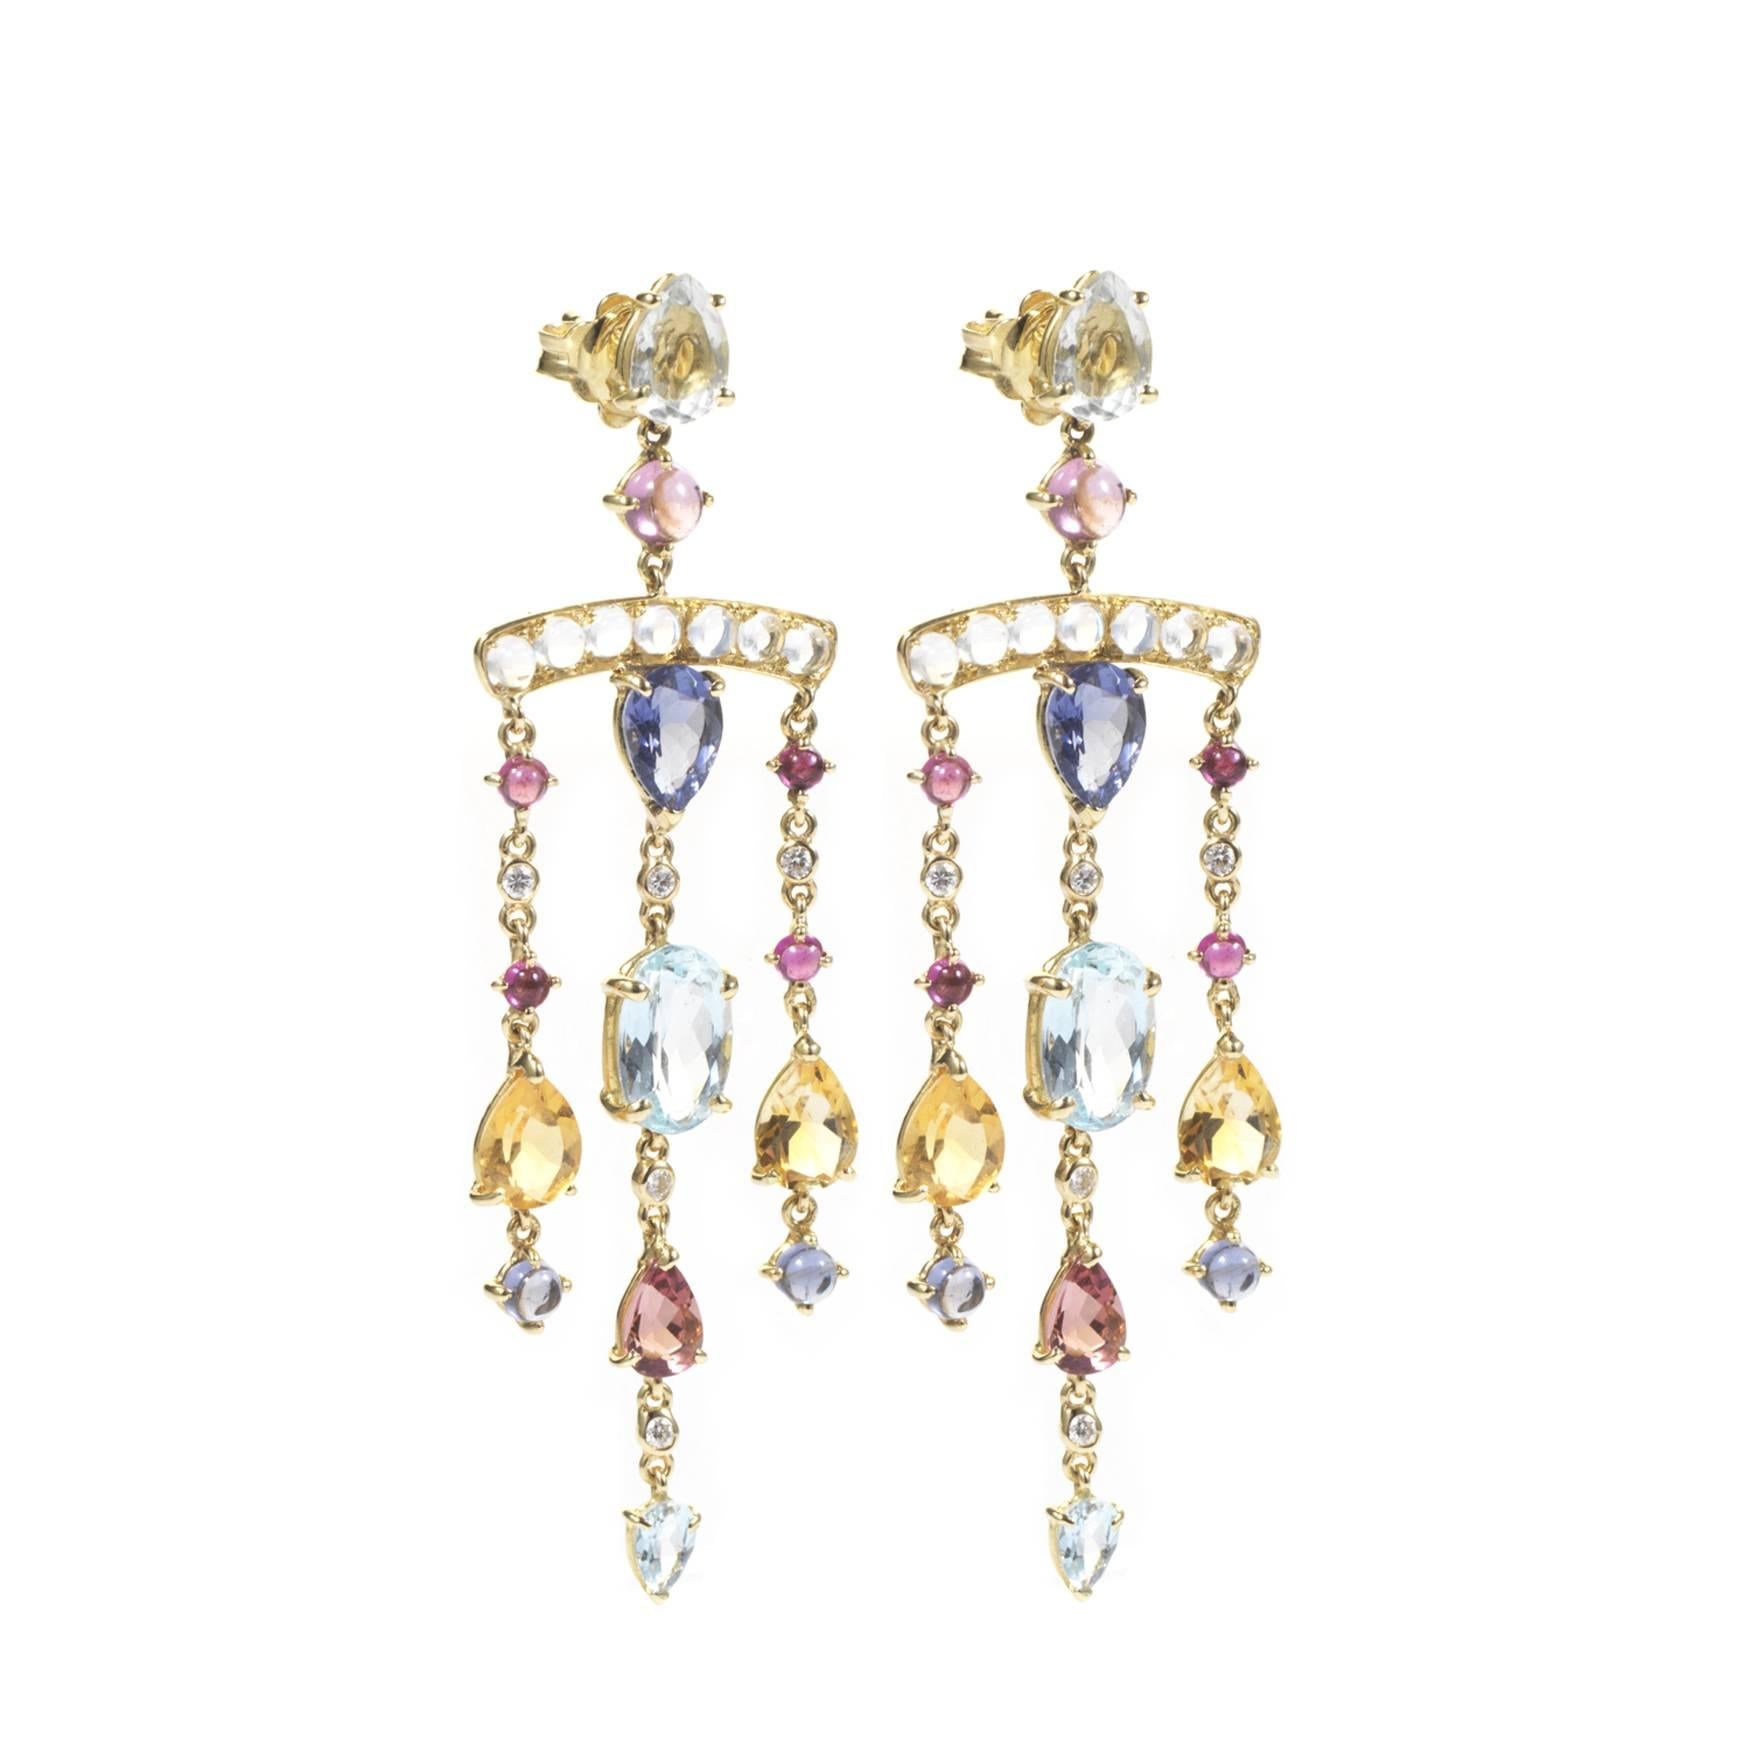 These DUBINI earrings from the 'Theodora' collection feature green amethyst, iolite, aquamarine, citrine, rubellite, moonstones and diamonds set in 18K yellow gold.

…………………………………………………………………………………………………………………………………………………………………….

Inspired by